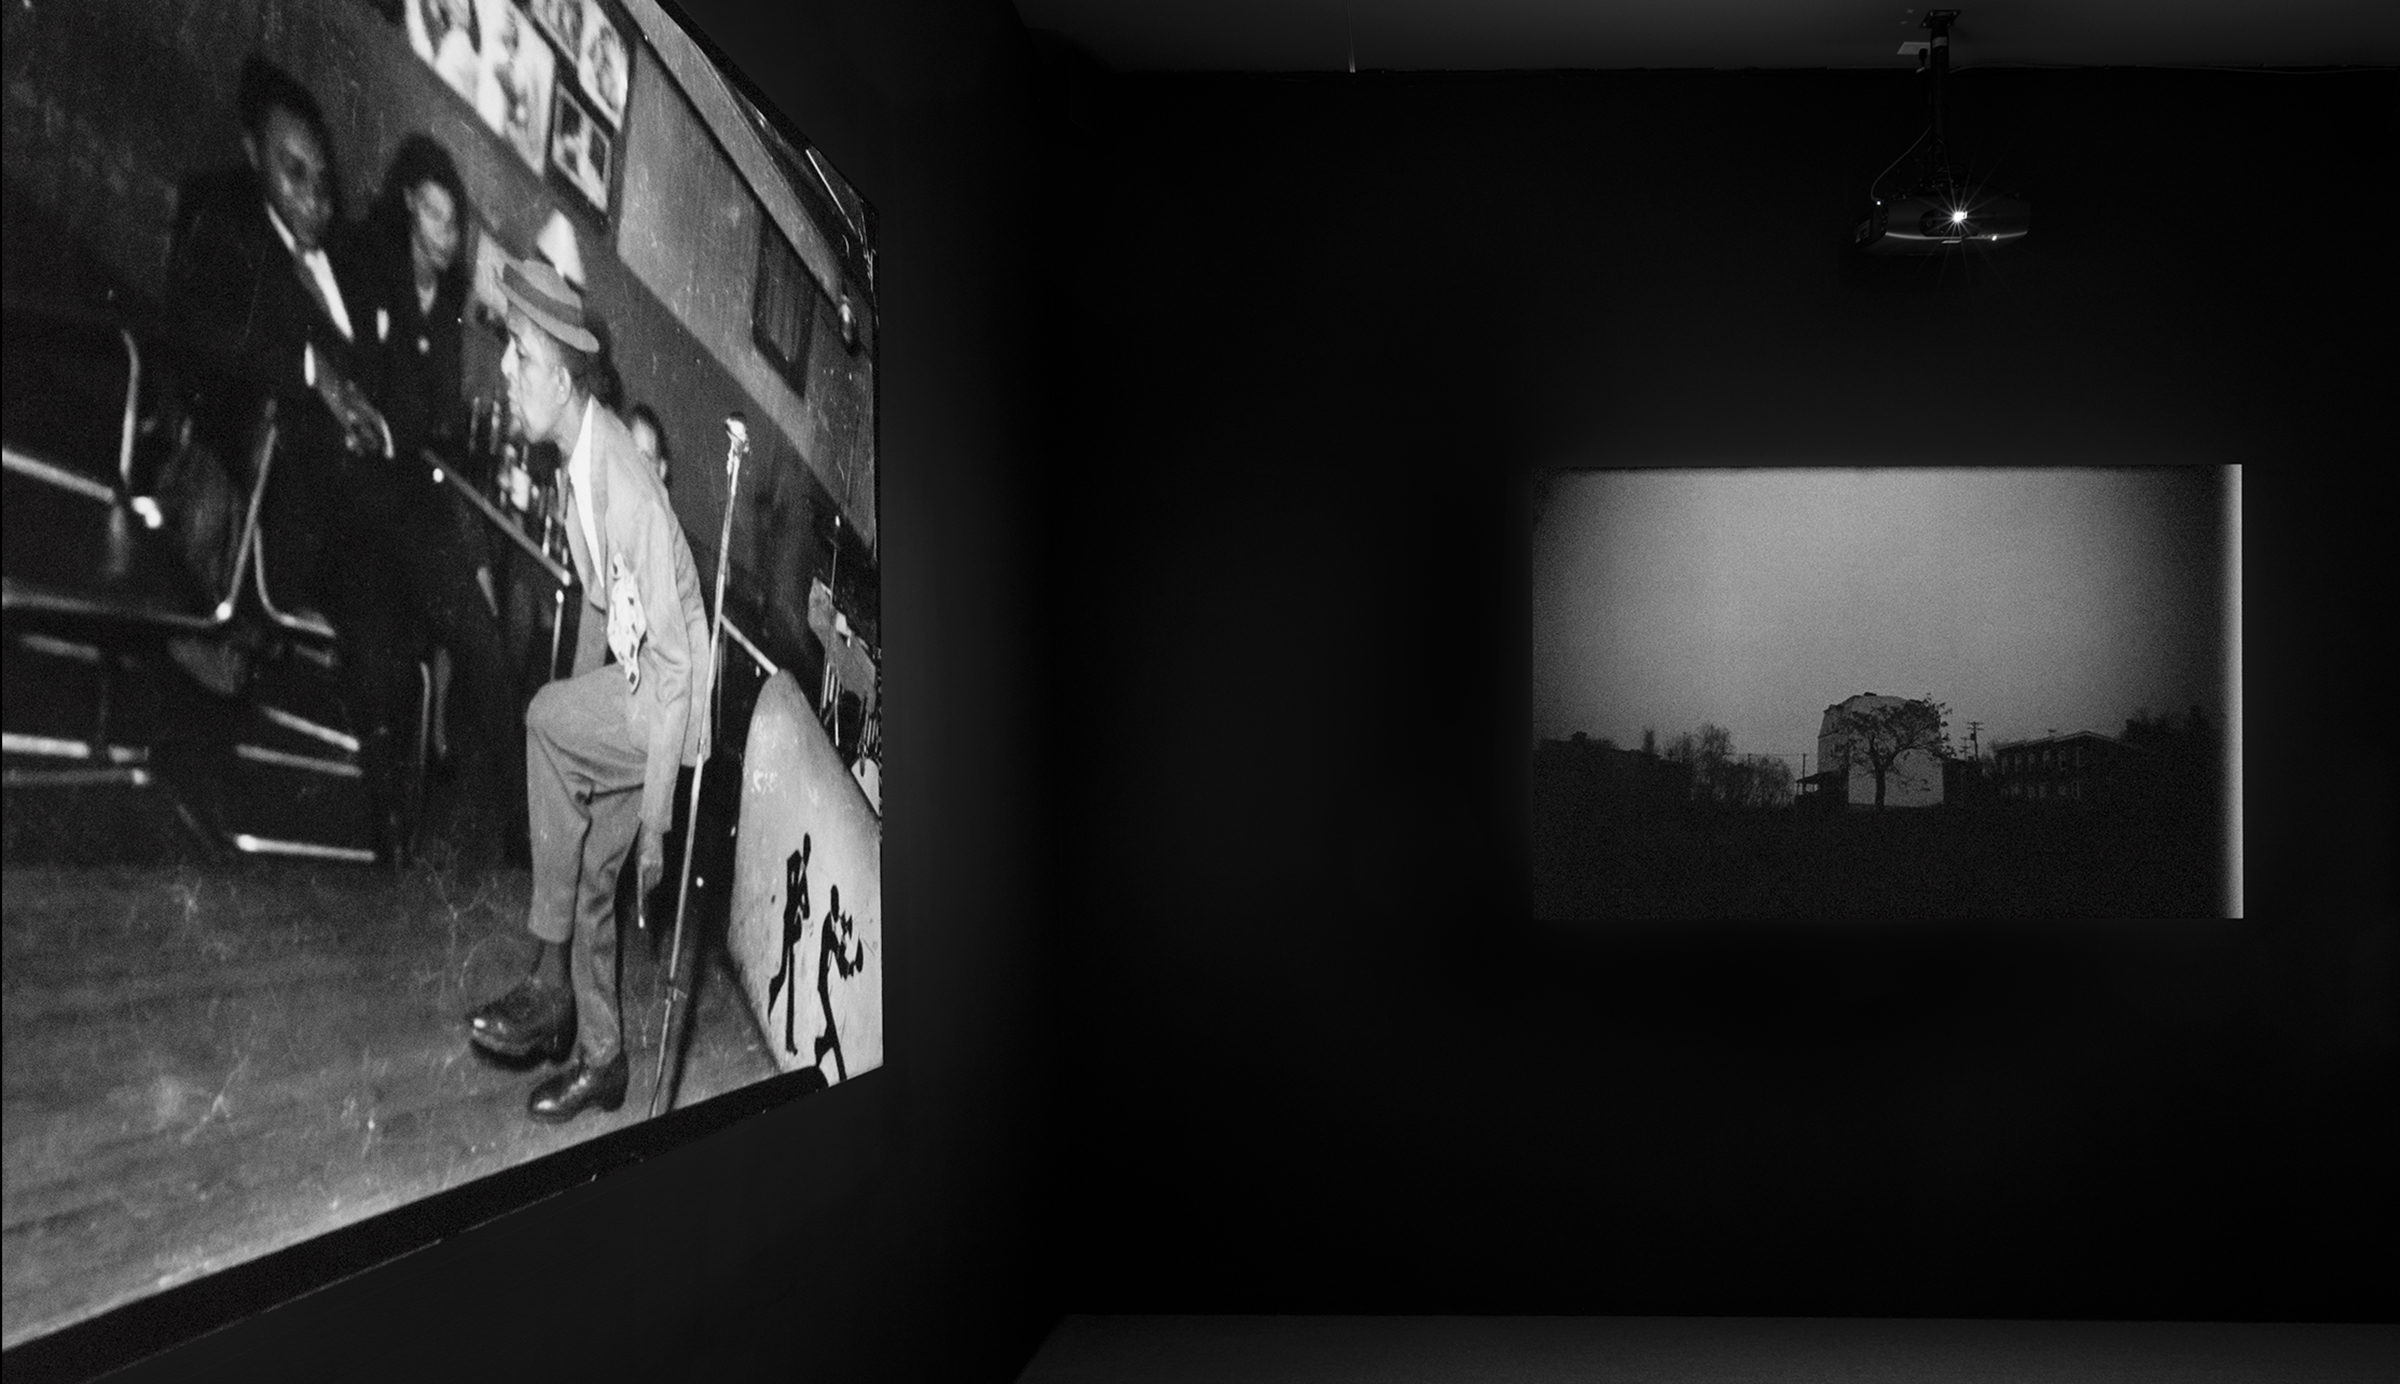 Installation view of REkOGNIZE showing images and videos projected onto walls in a dark room 